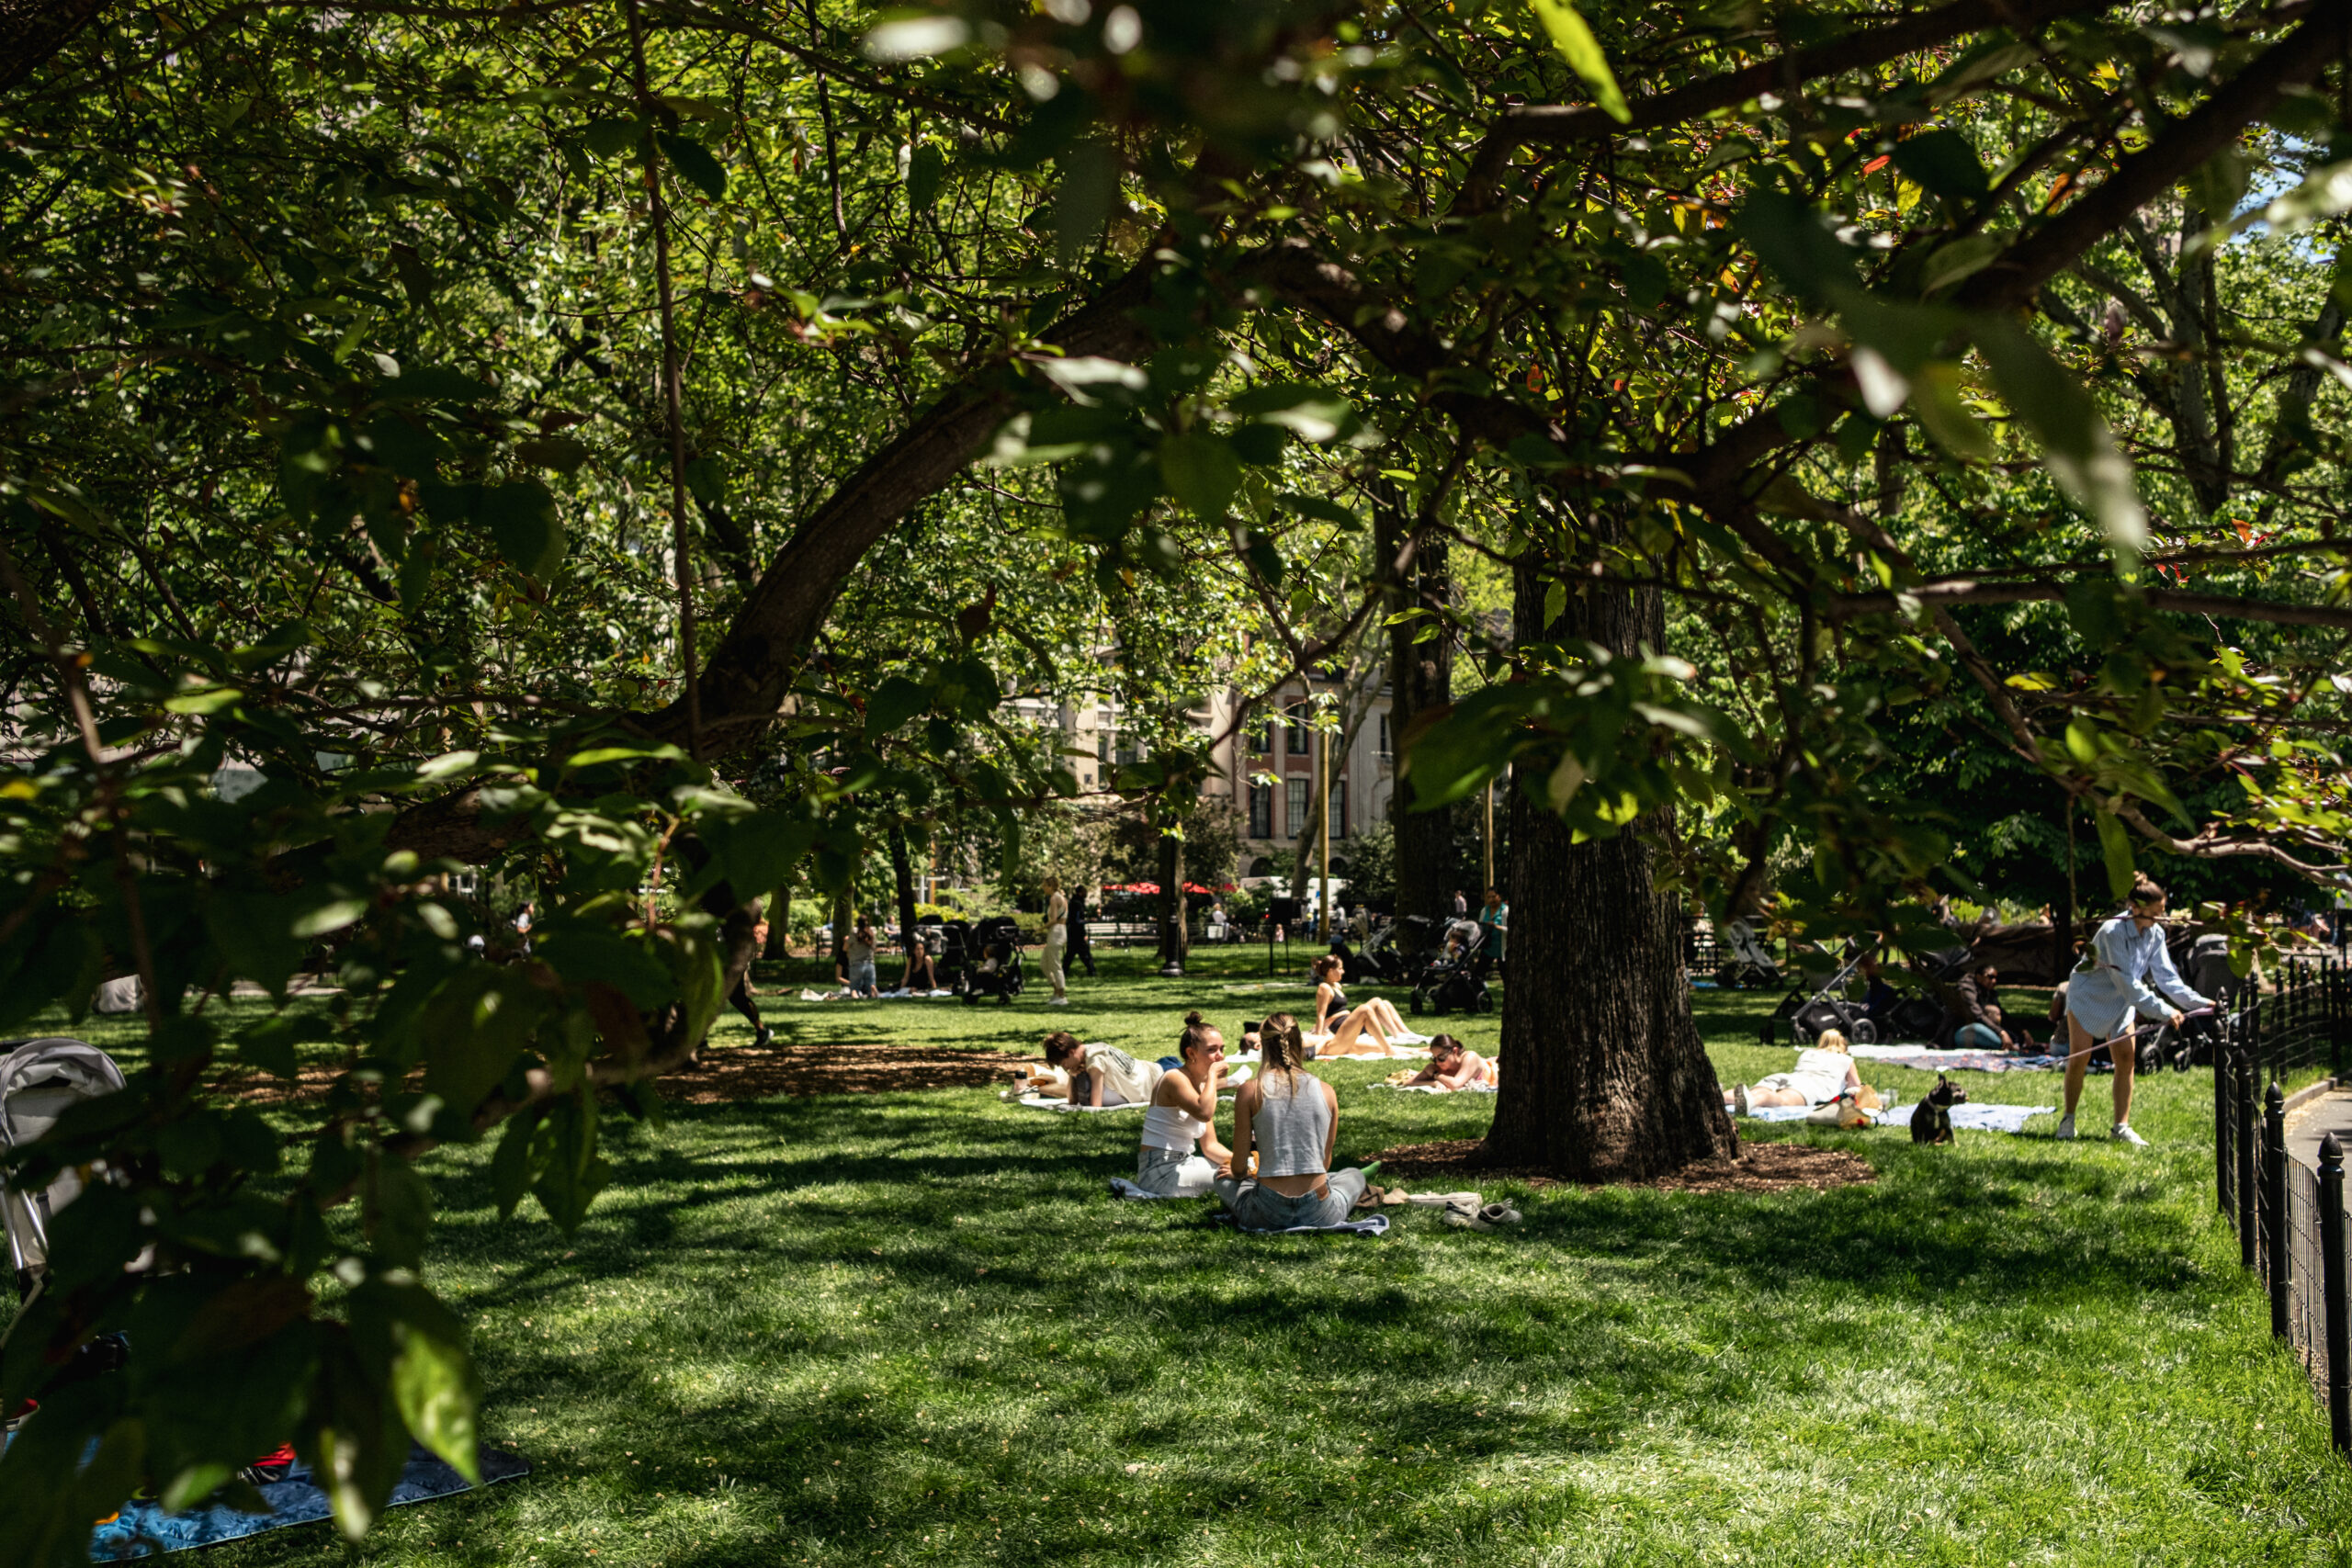 People relax in the park, seeking shade and comfort under the tree canopy.